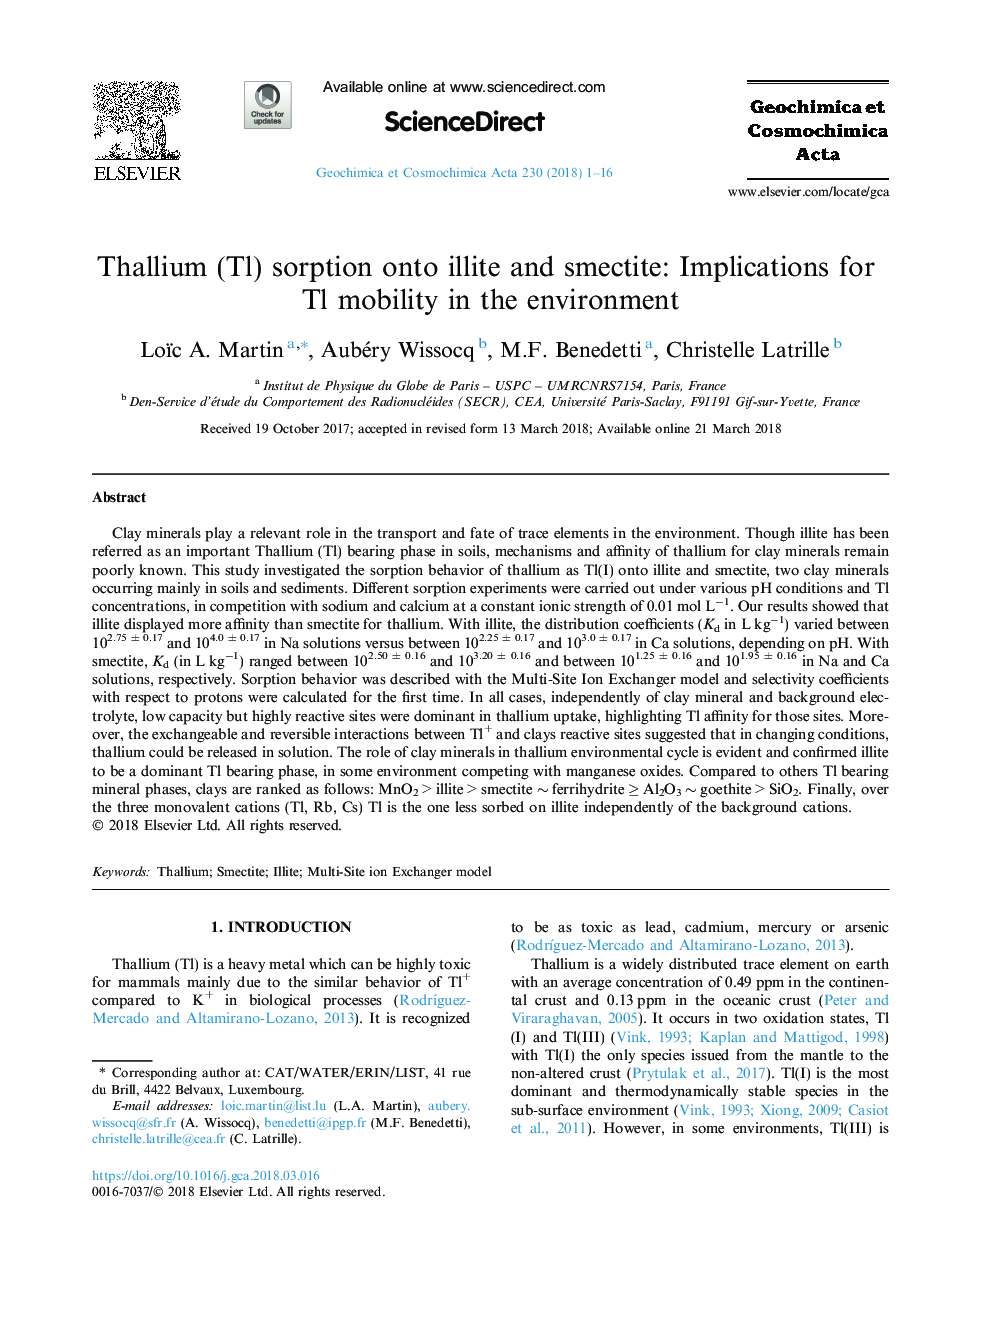 Thallium (Tl) sorption onto illite and smectite: Implications for Tl mobility in the environment